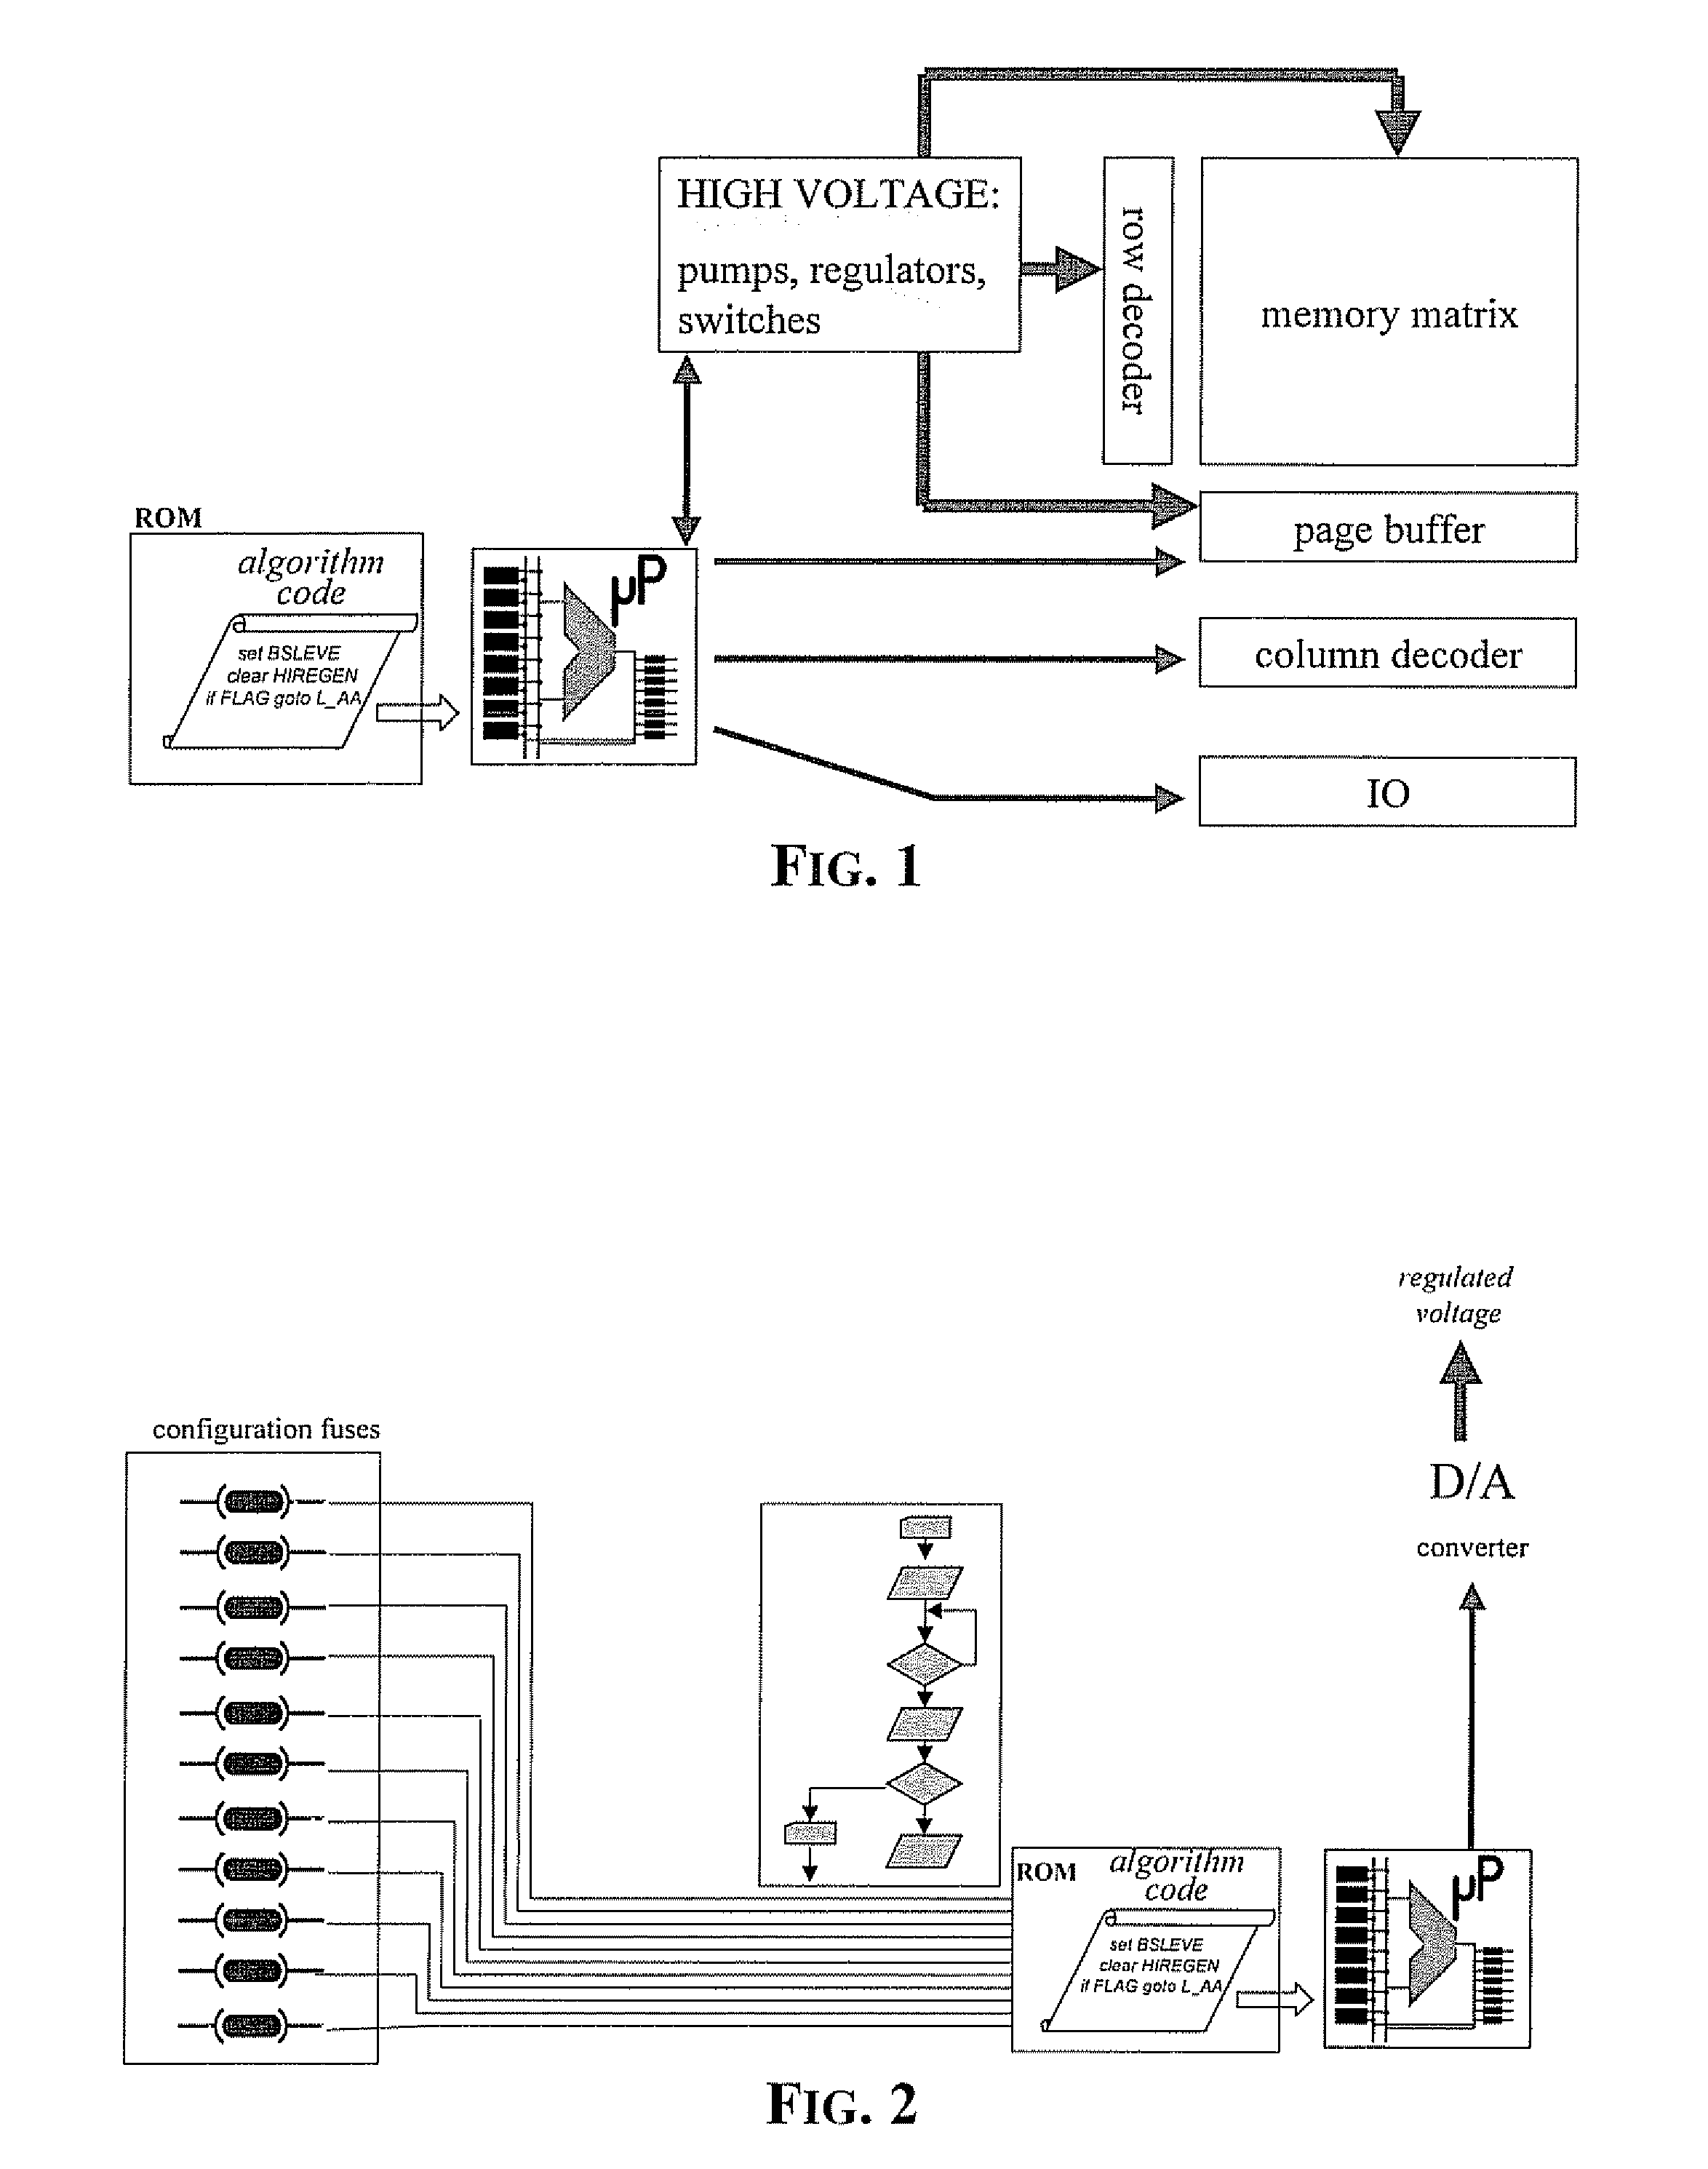 Configuration of a multilevel flash memory device